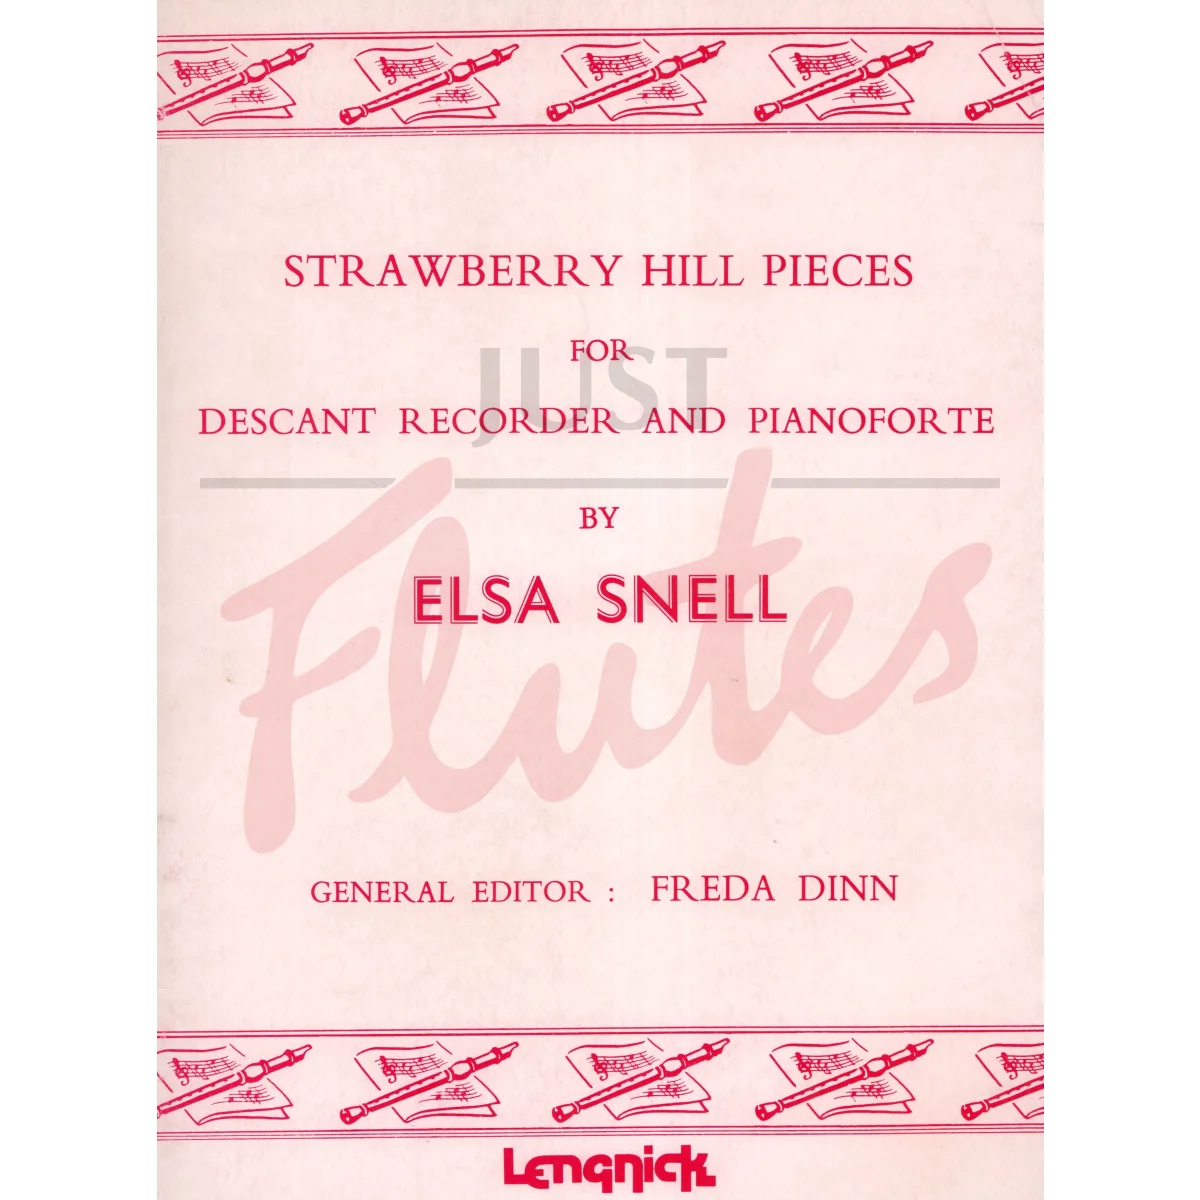 Strawberry Hill Pieces